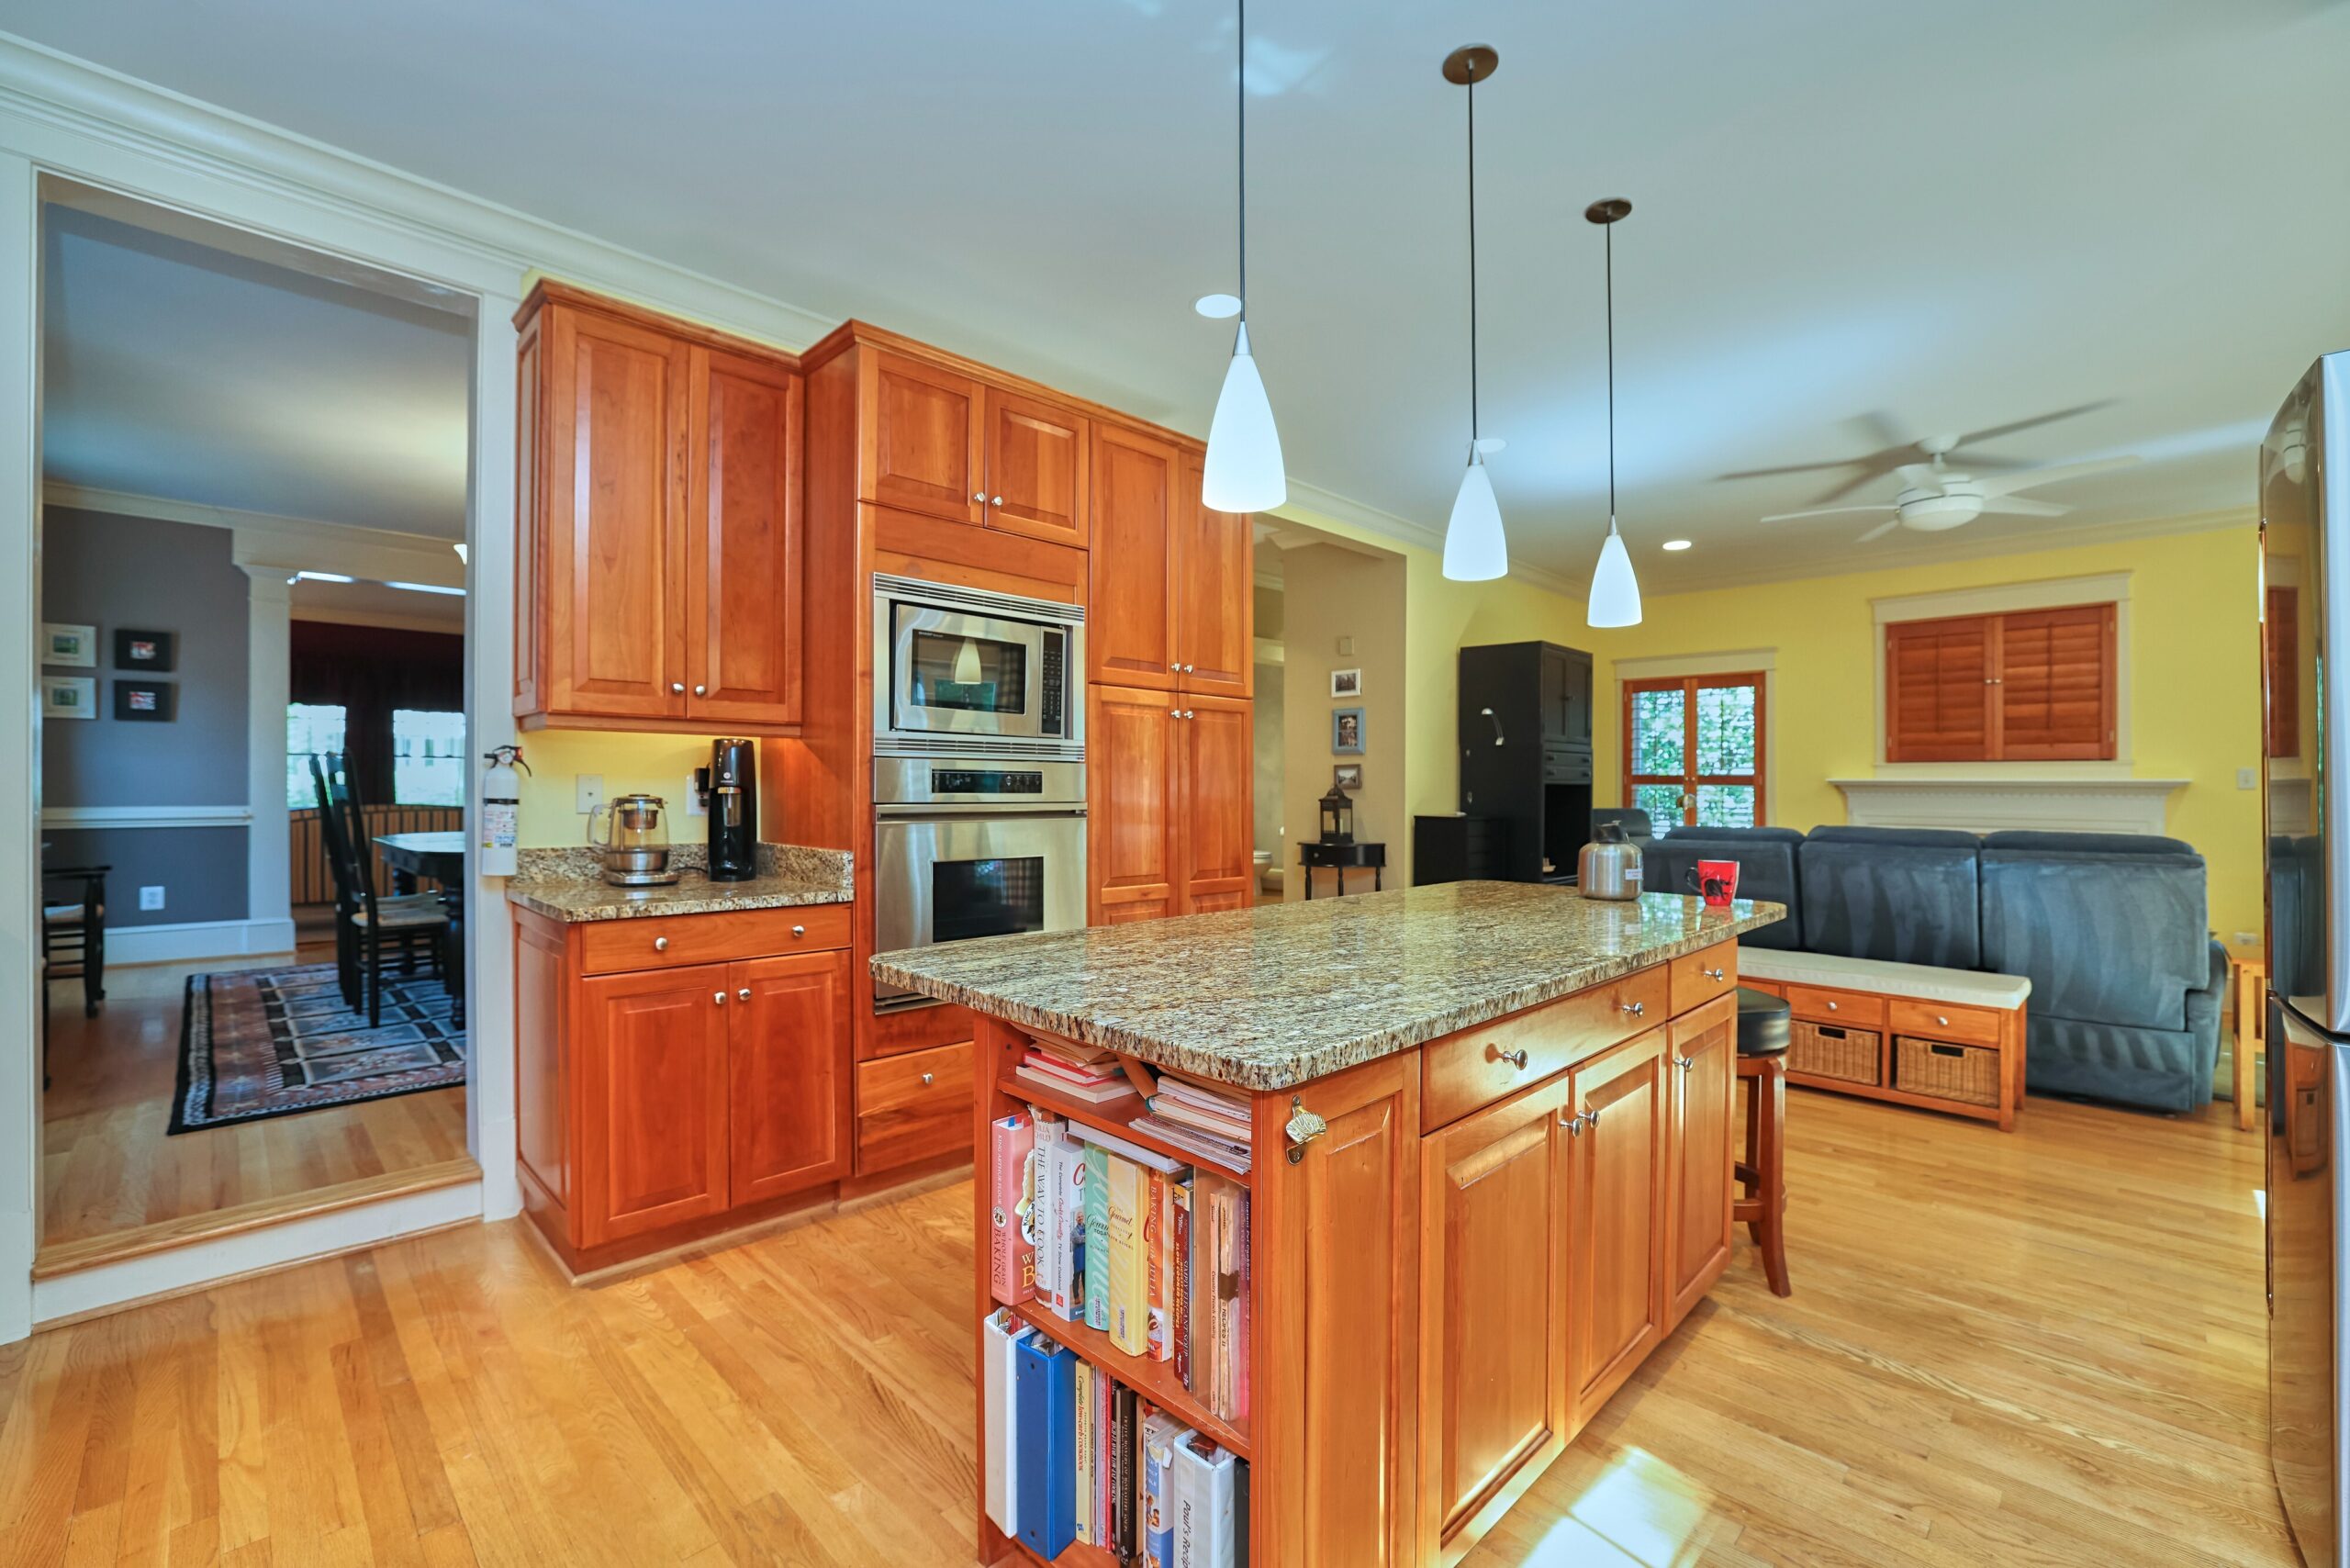 Professional interior photo of 819 N Fillmore St - Showing the kitchen with cherry cabinets, granite counters, hardwood floors, and a large island with built-in cookbook shelf